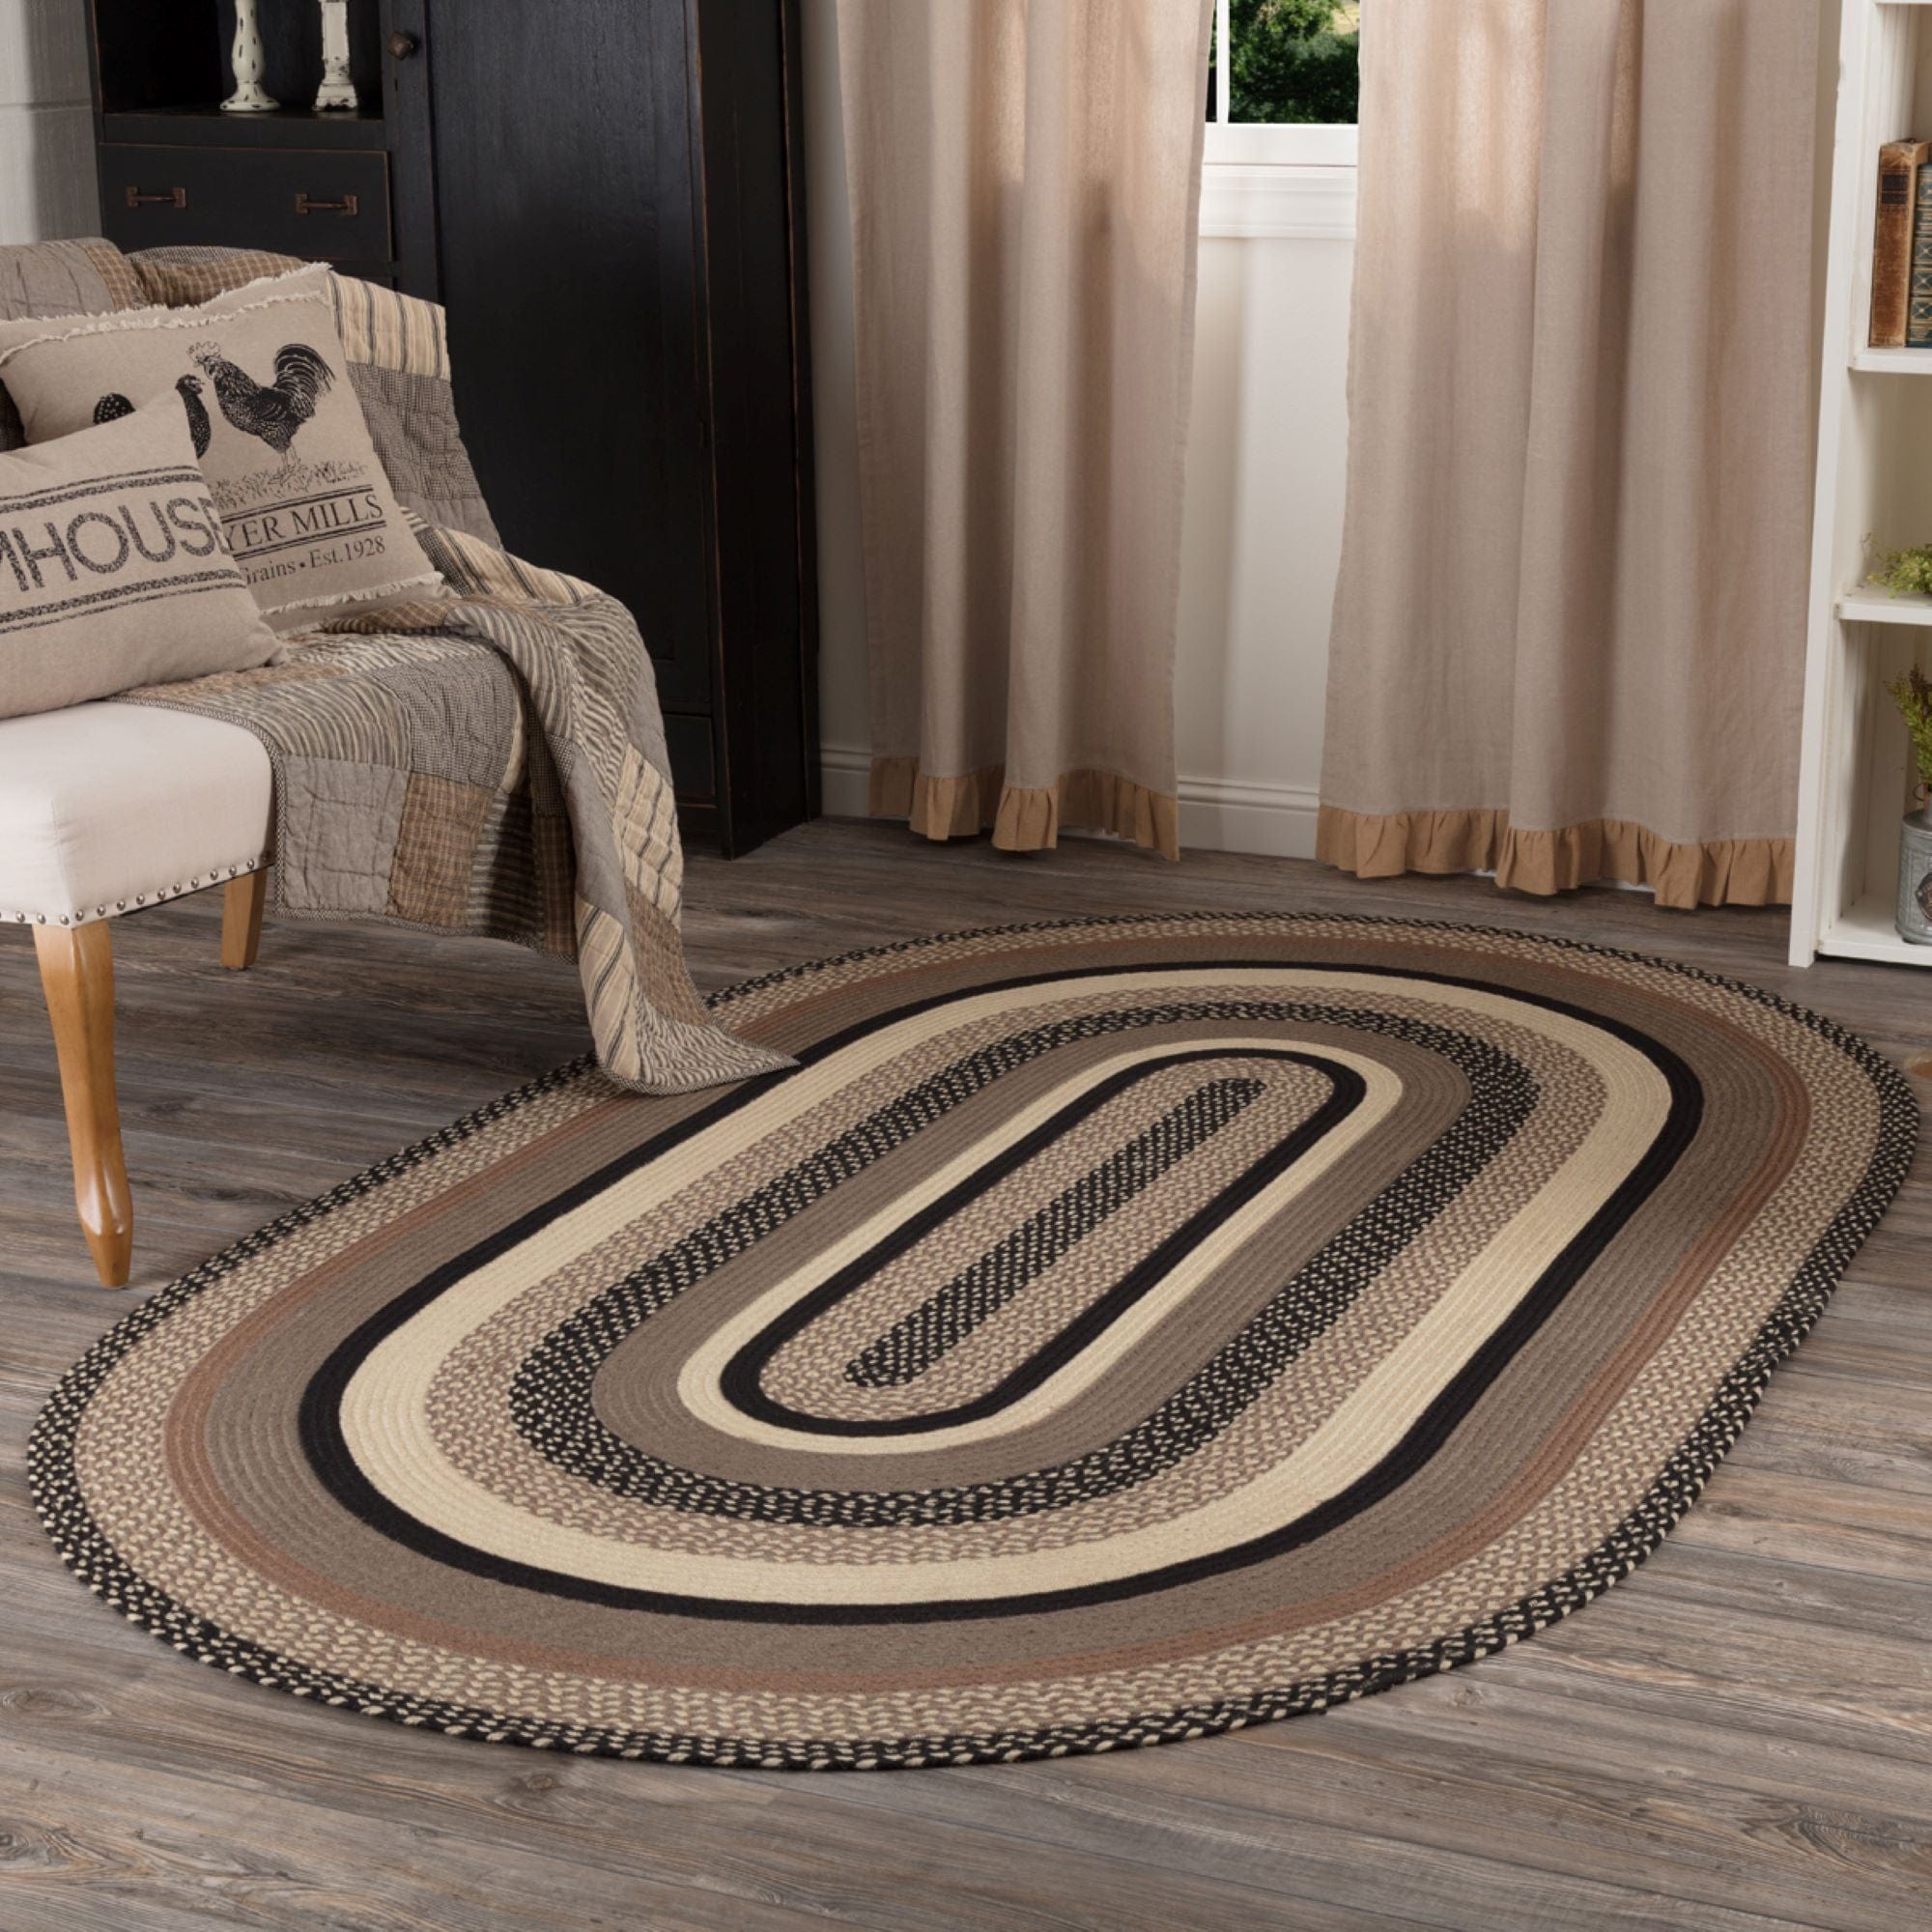 Sawyer Mill Charcoal Braided Oval Rug w/ Pad - Retro Barn Country Linens